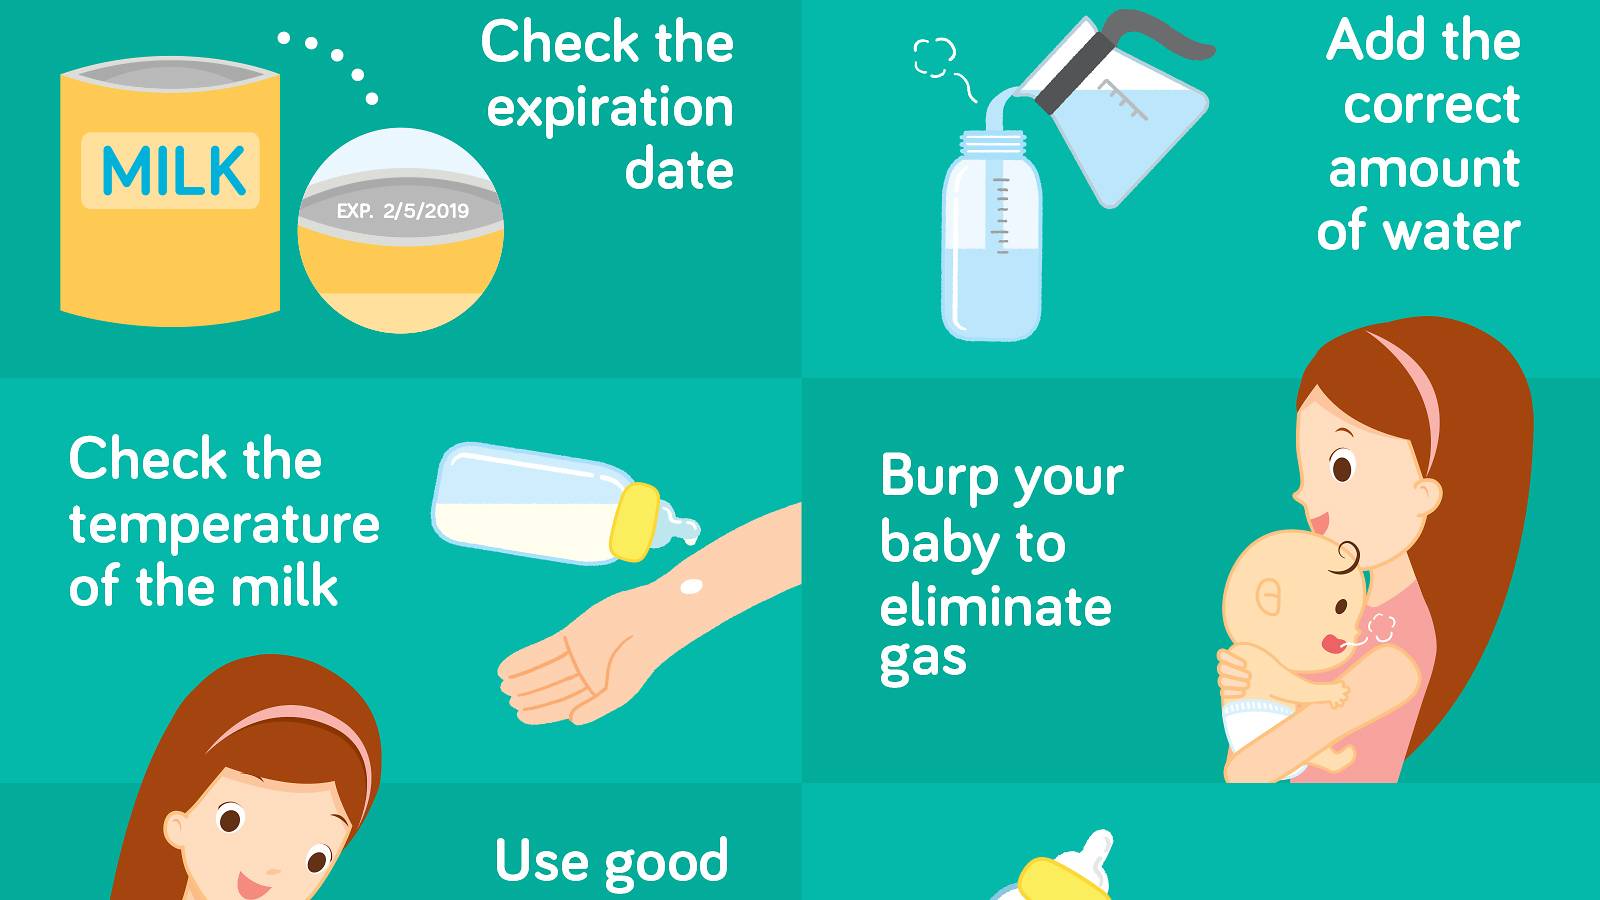 Babies-Do's-and-dont's-of-bottlefeeding-your-baby-safely-[Infographic]_03